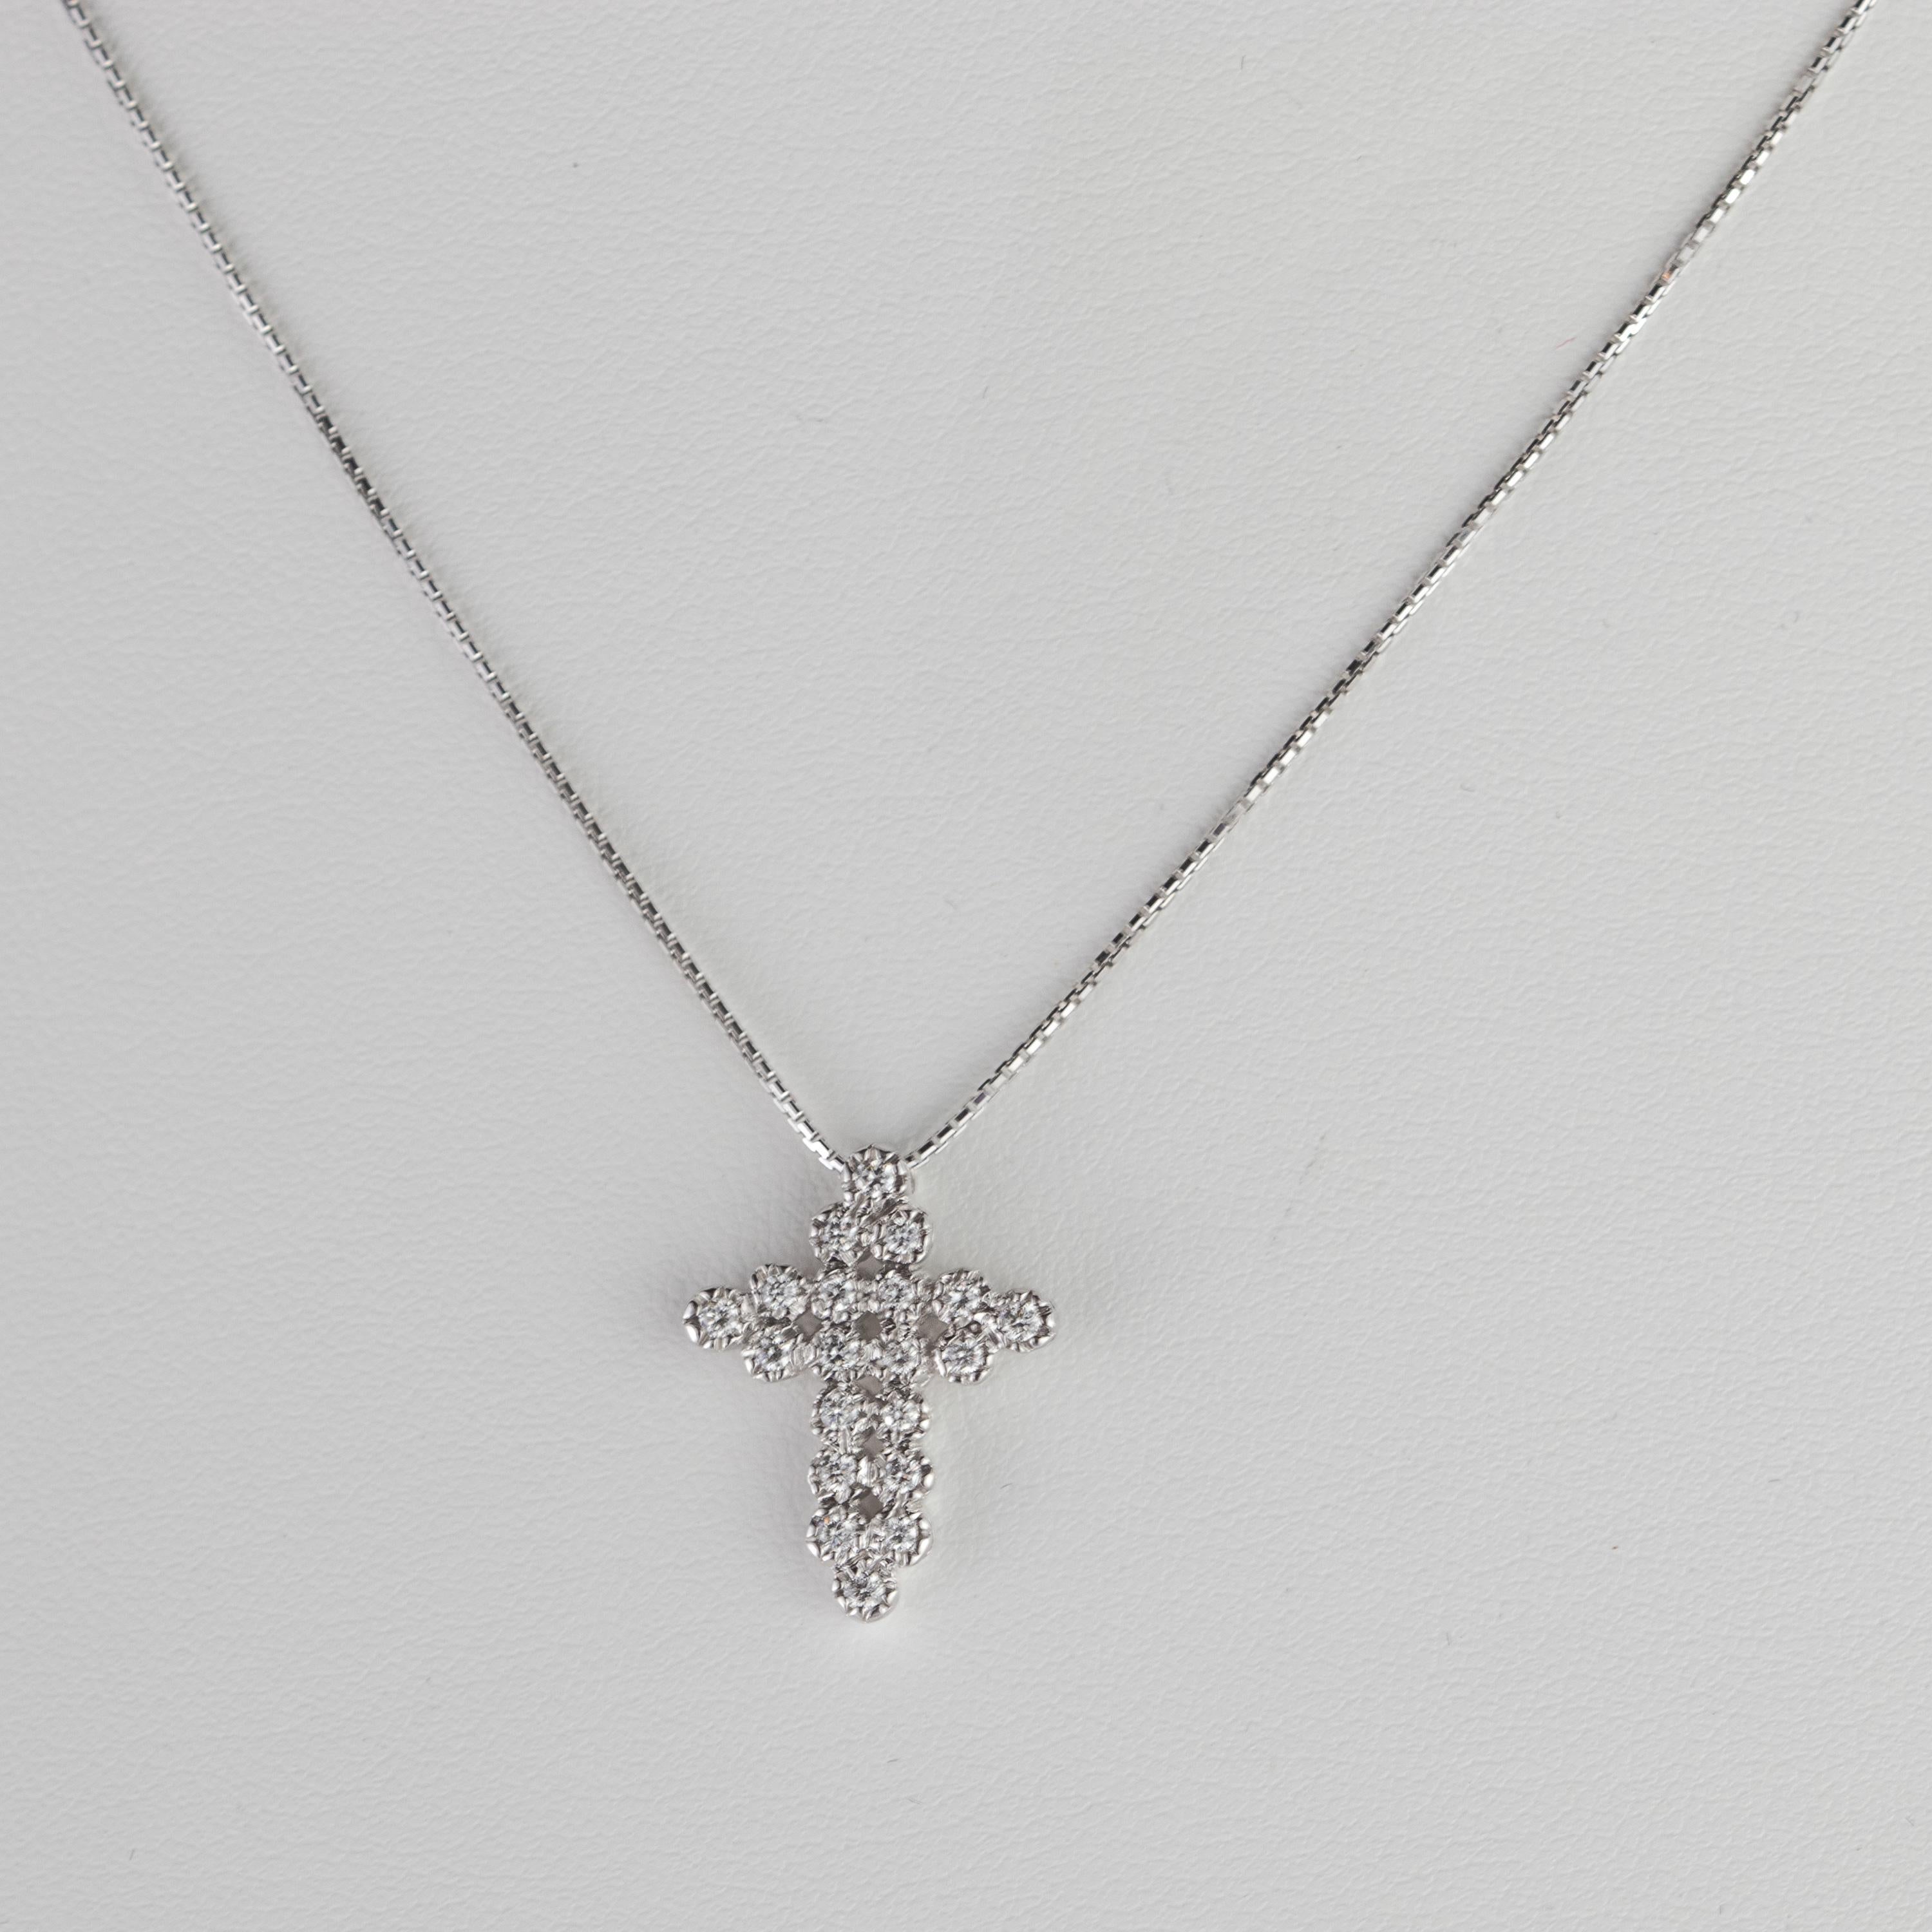 Handmade sparkling and delicate cross pendant necklace. A beautiful and delicate cross made of 1.6 carats of top quality diamonds softly woven with a luxury design. 20 gems create a unique pendant full of light and glamour. Holded by a 18 karat